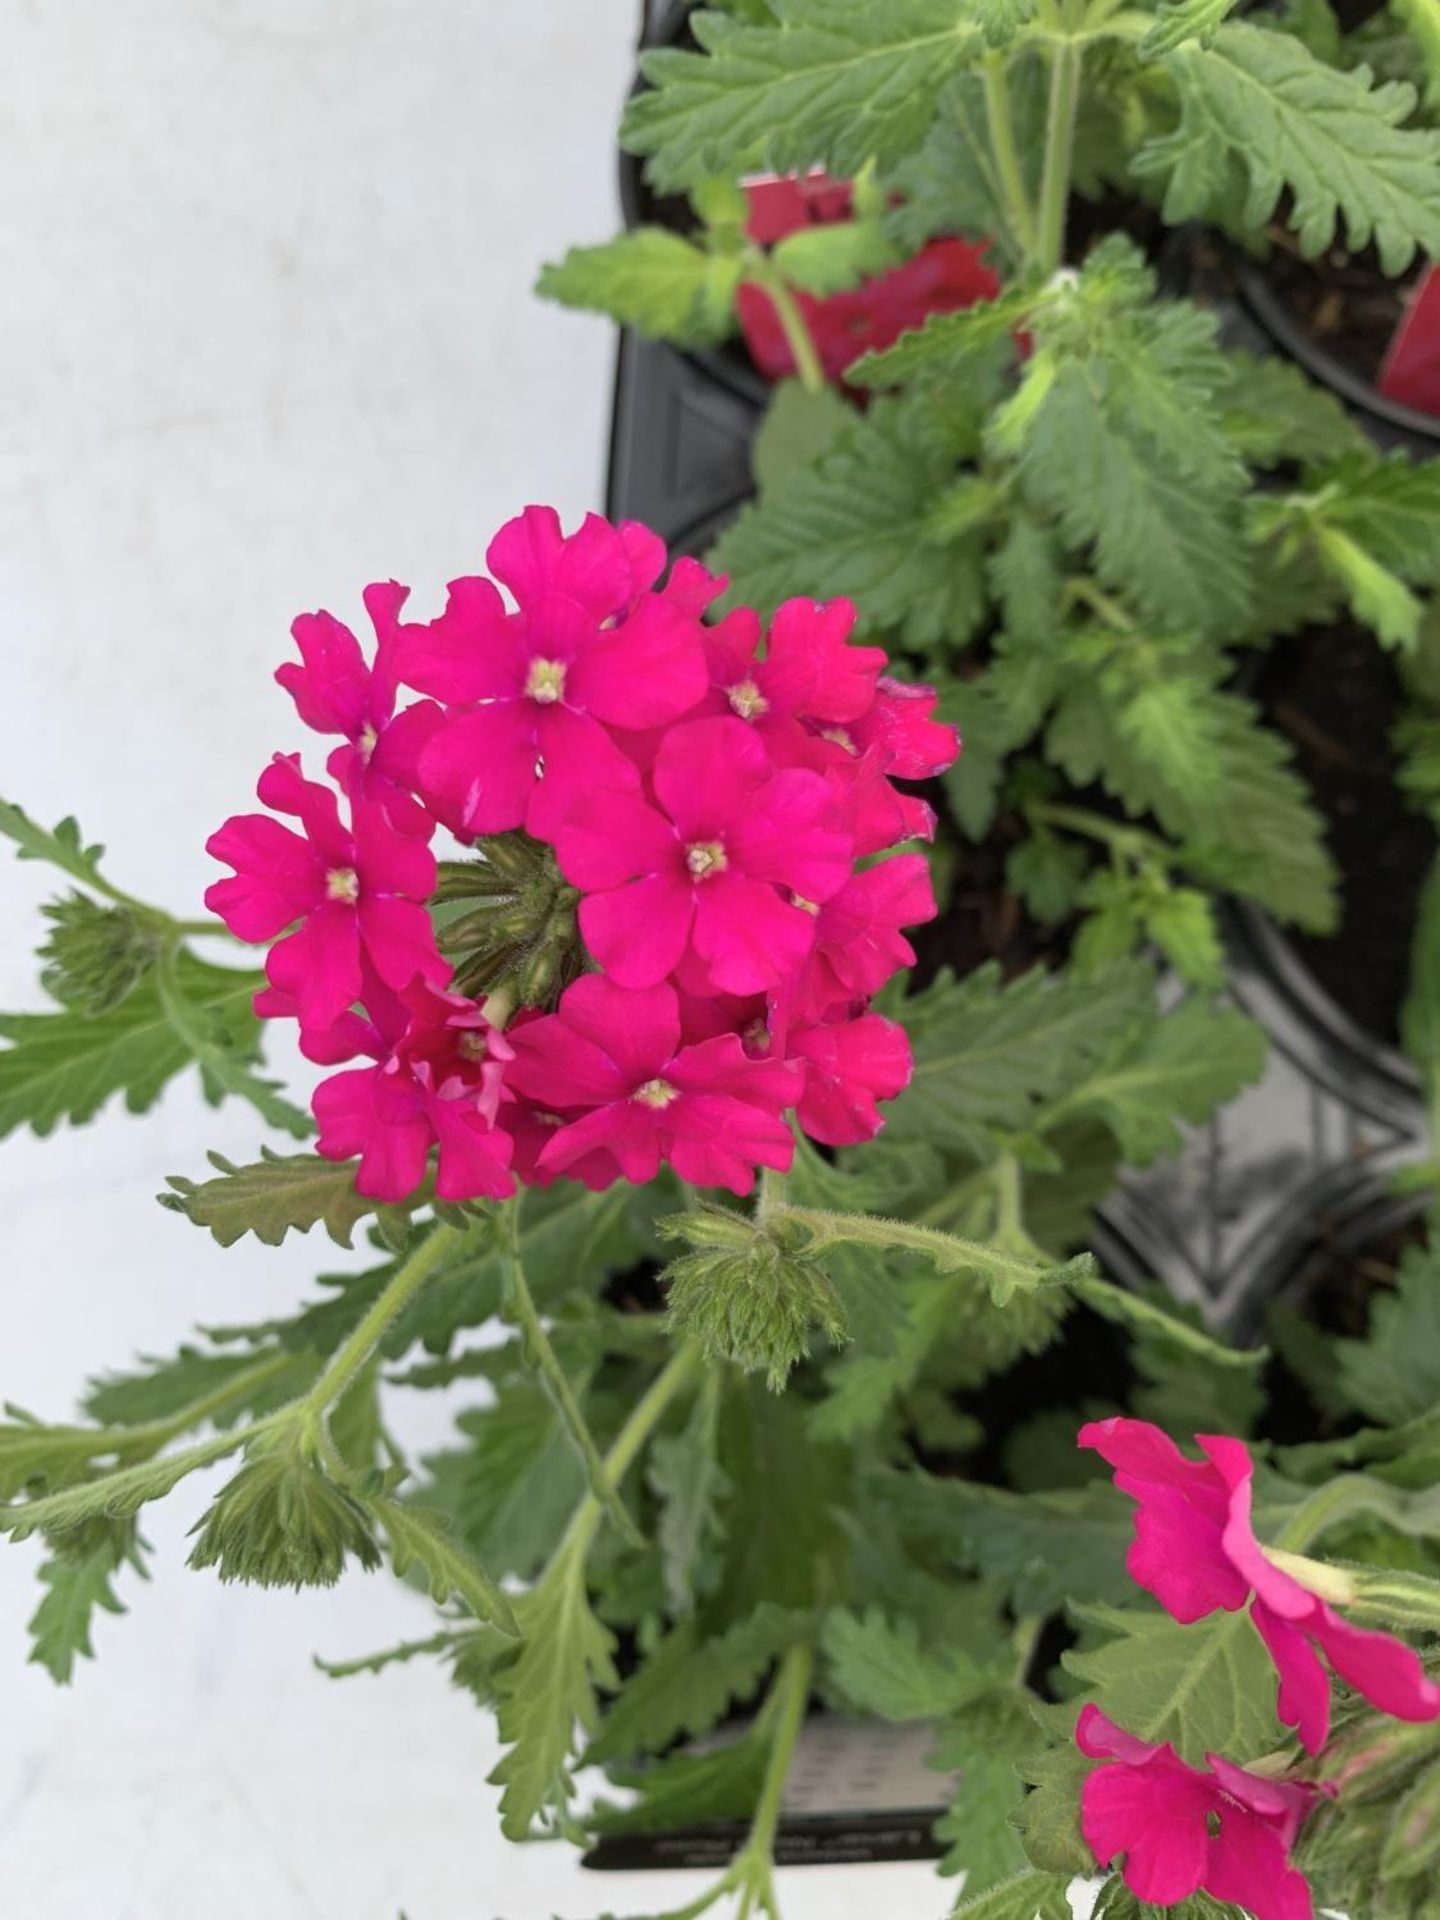 FIFTEEN TRAILING VERBENA LANAI IN NEON ROSE BASKET PLANTS ON A TRAY IN P9 POTS PLUS VAT TO BE SOLD - Image 3 of 5